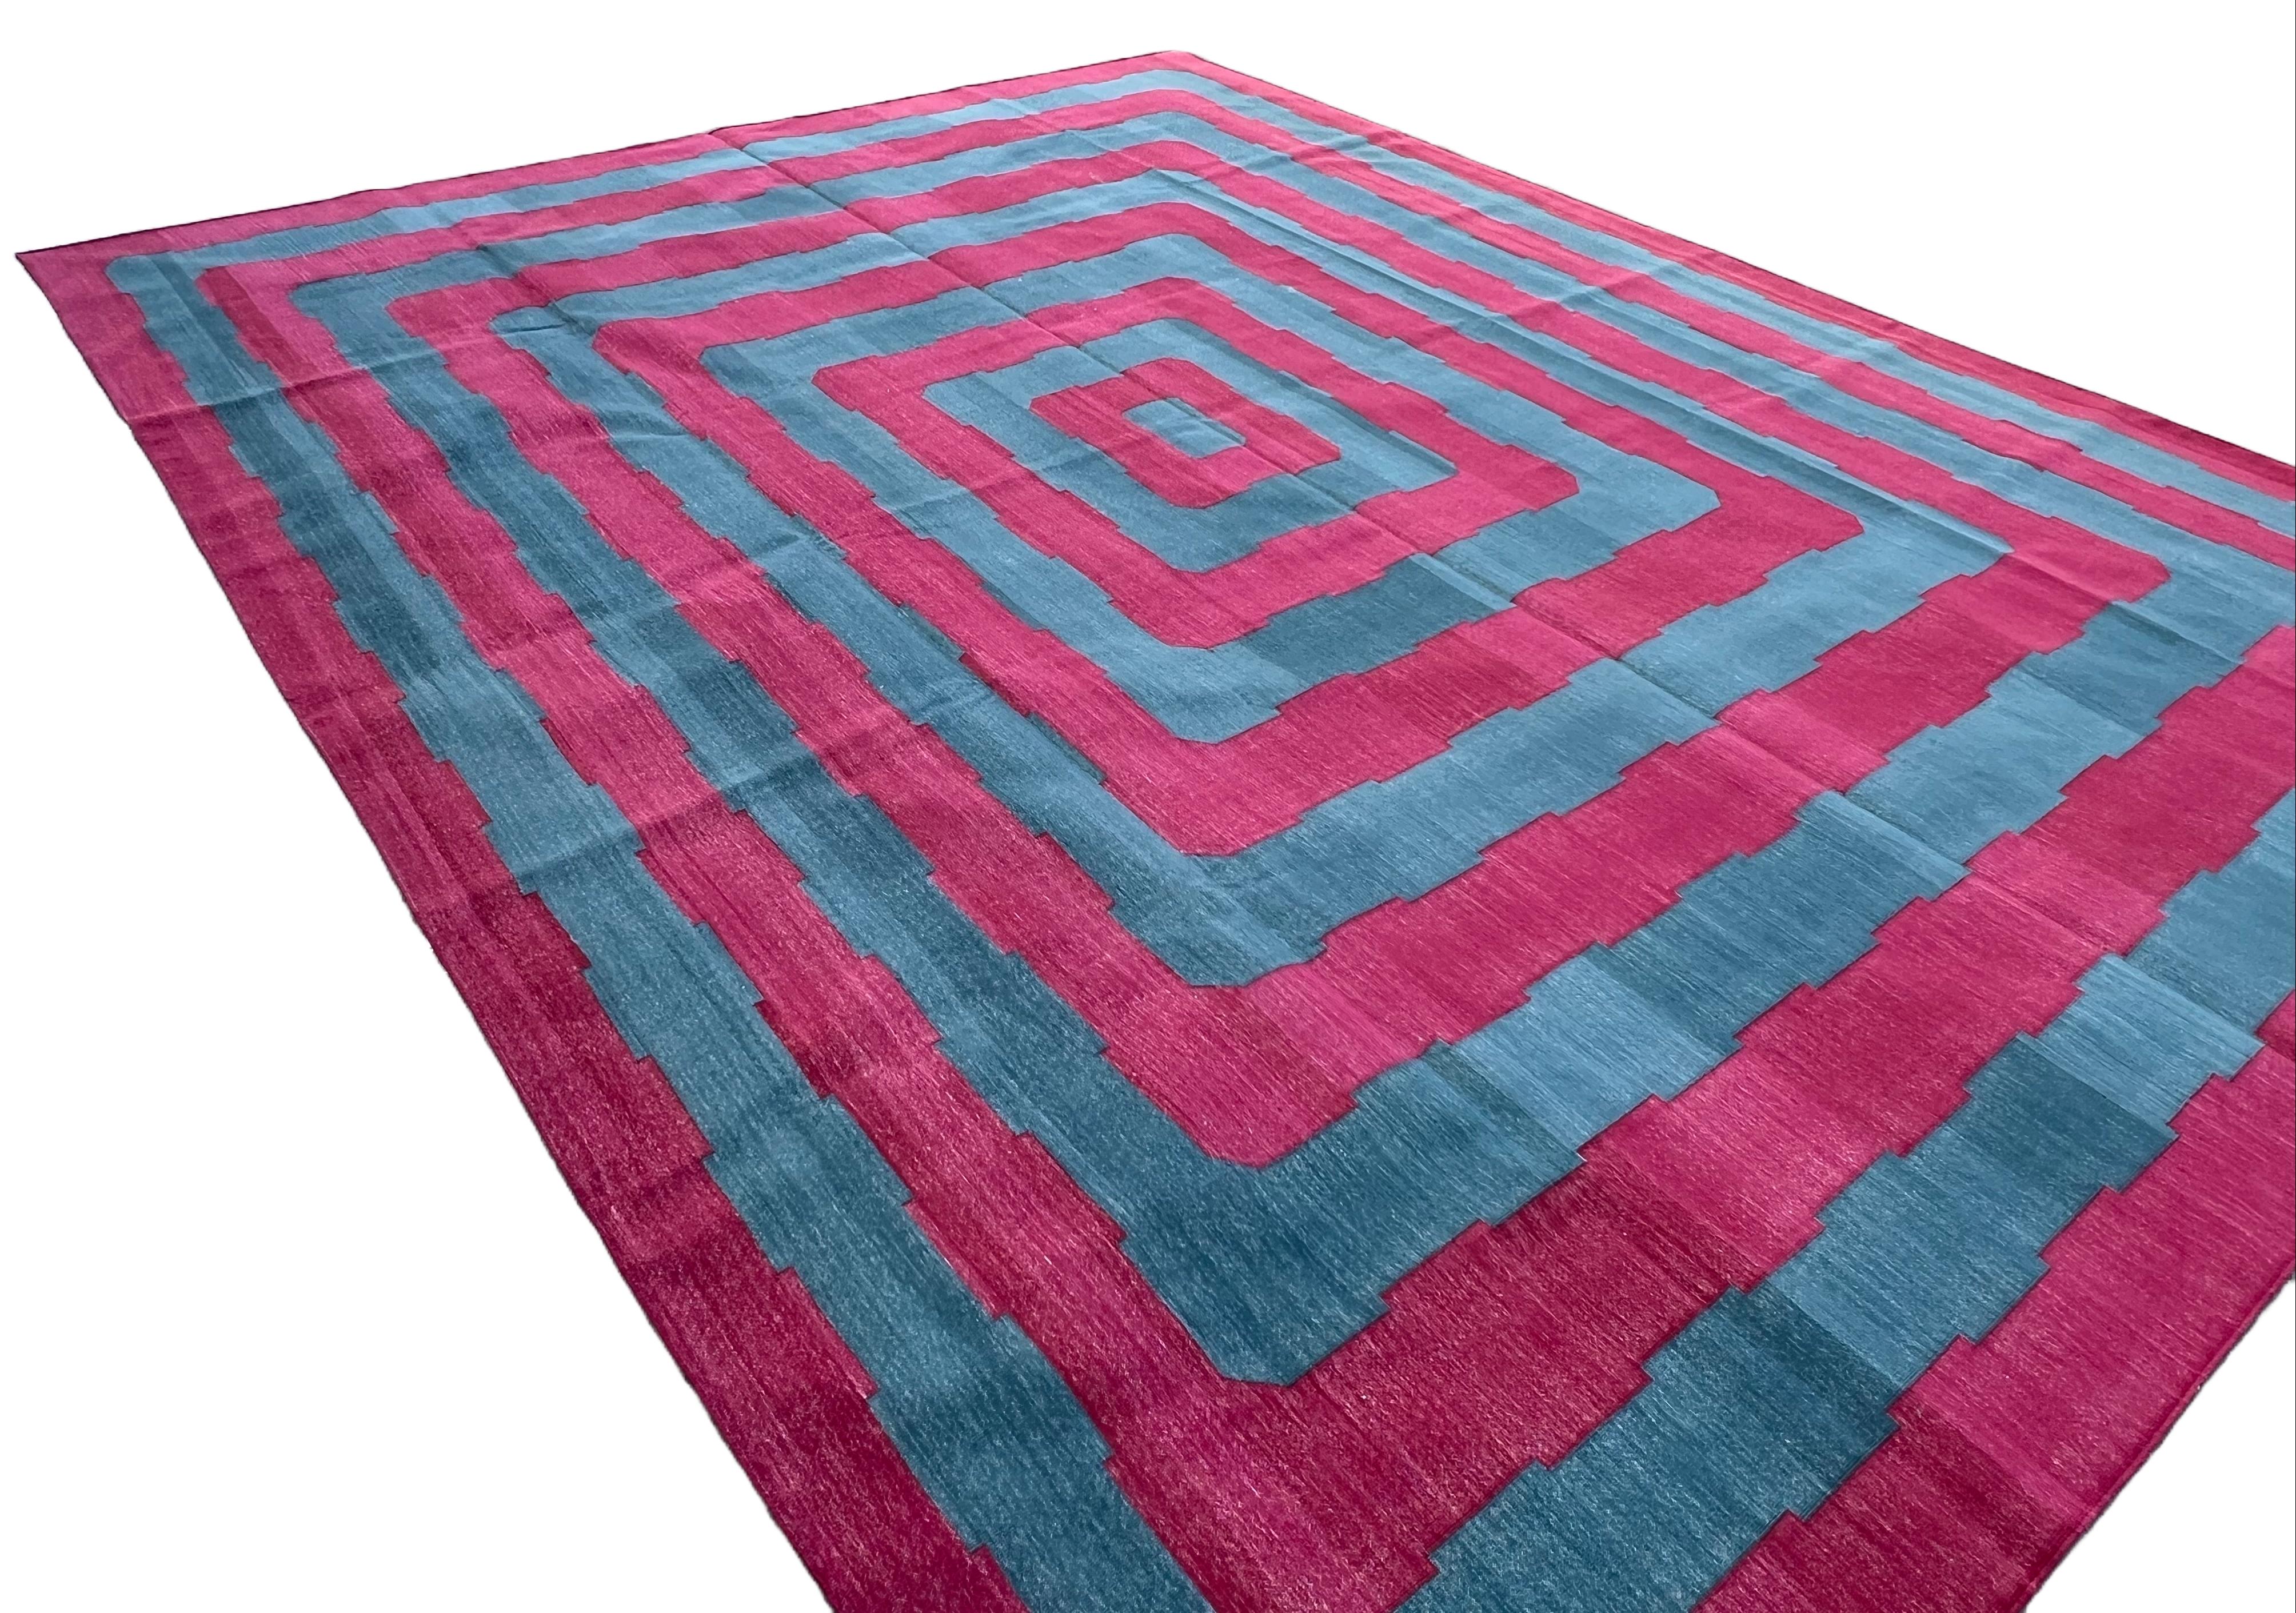 Contemporary Handmade Cotton Area Flat Weave Rug, 10x14 Blue And Pink Striped Indian Dhurrie For Sale